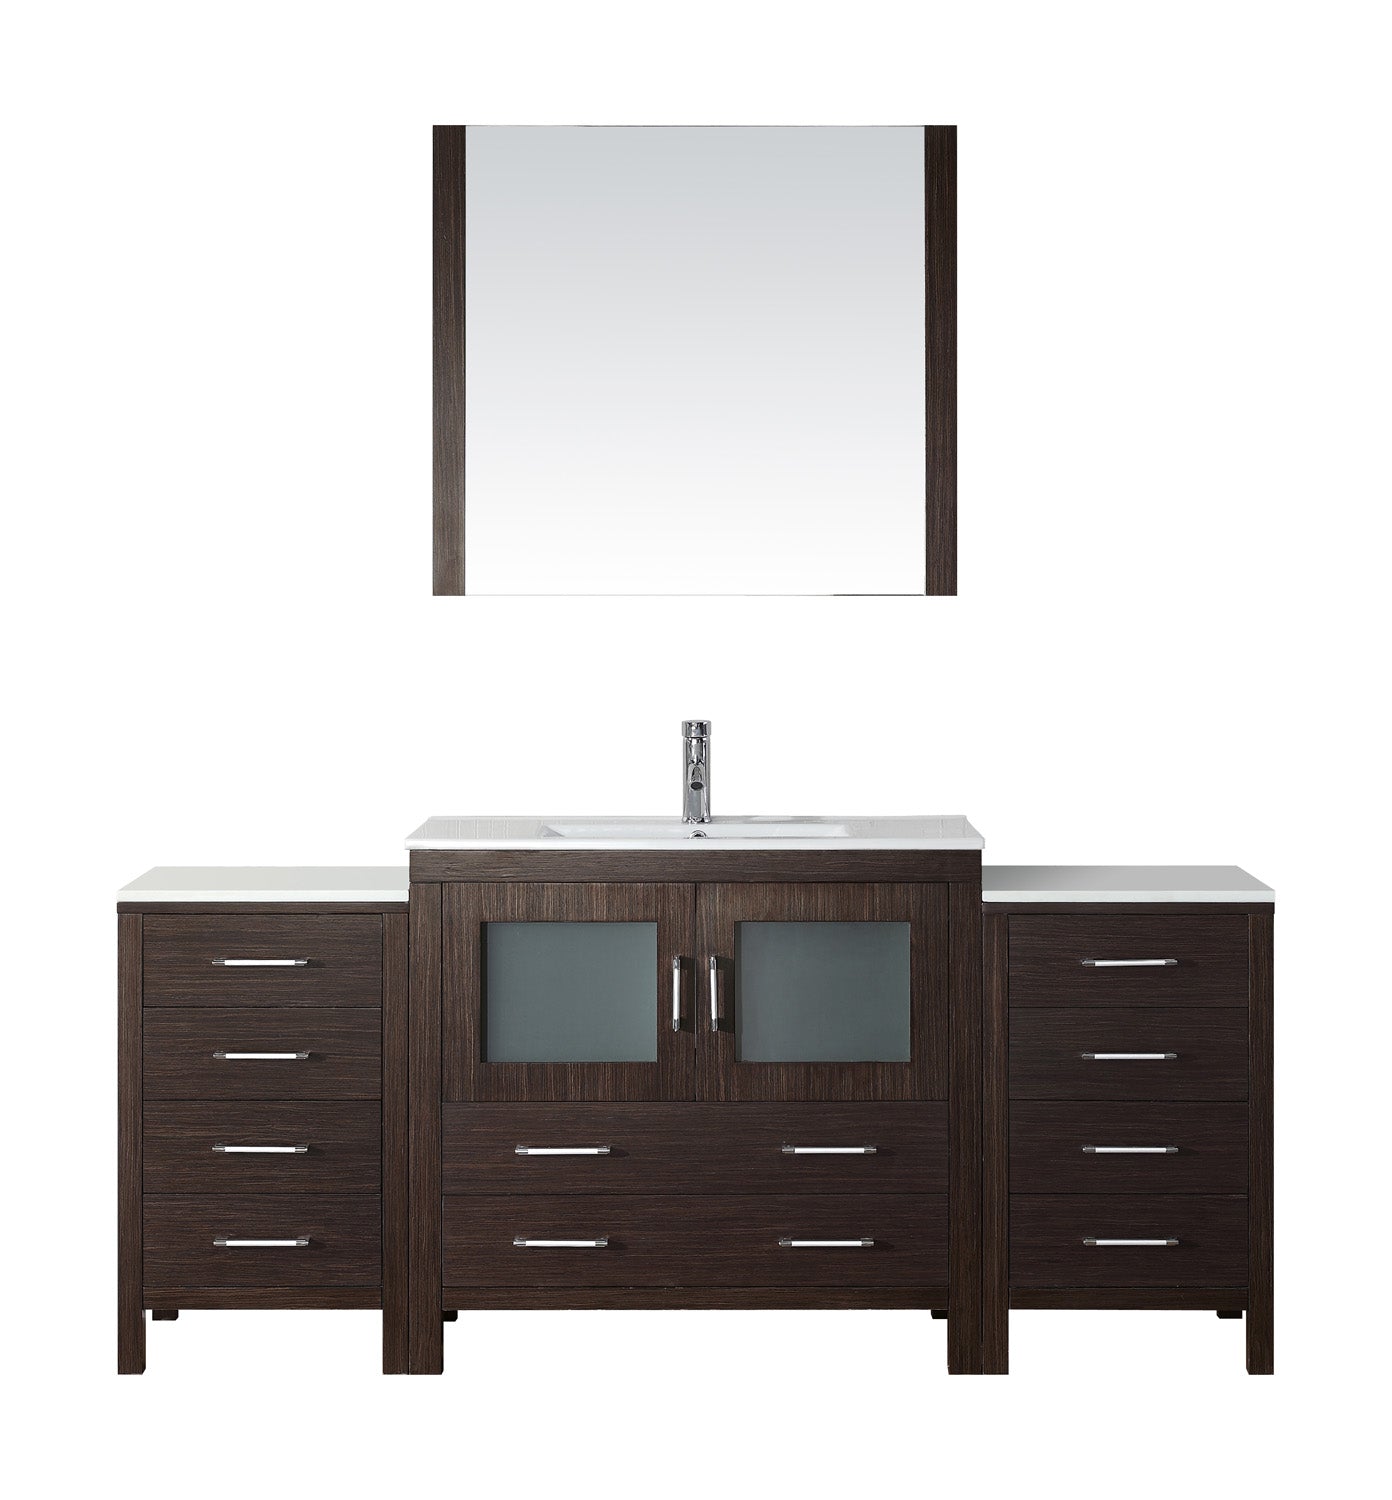 Virtu USA Dior 72" Single Bath Vanity in Espresso with Slim White Ceramic Top and Square Sink with Polished Chrome Faucet and Mirror - Luxe Bathroom Vanities Luxury Bathroom Fixtures Bathroom Furniture